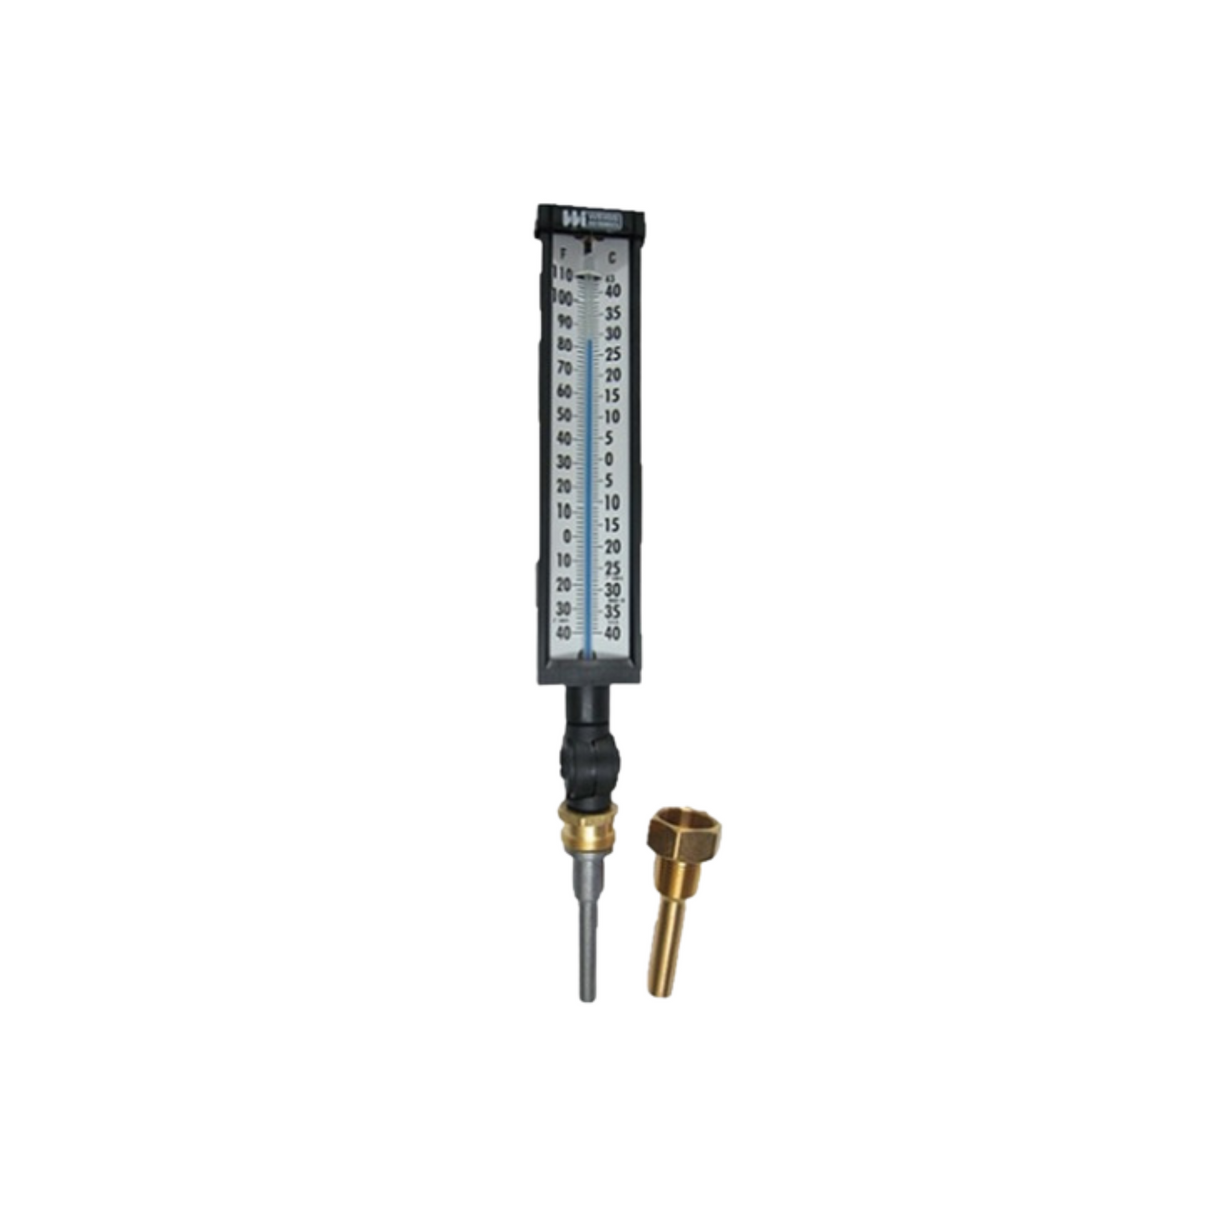 Weiss Instruments 9VU35-240 Industrial Angle Thermometer